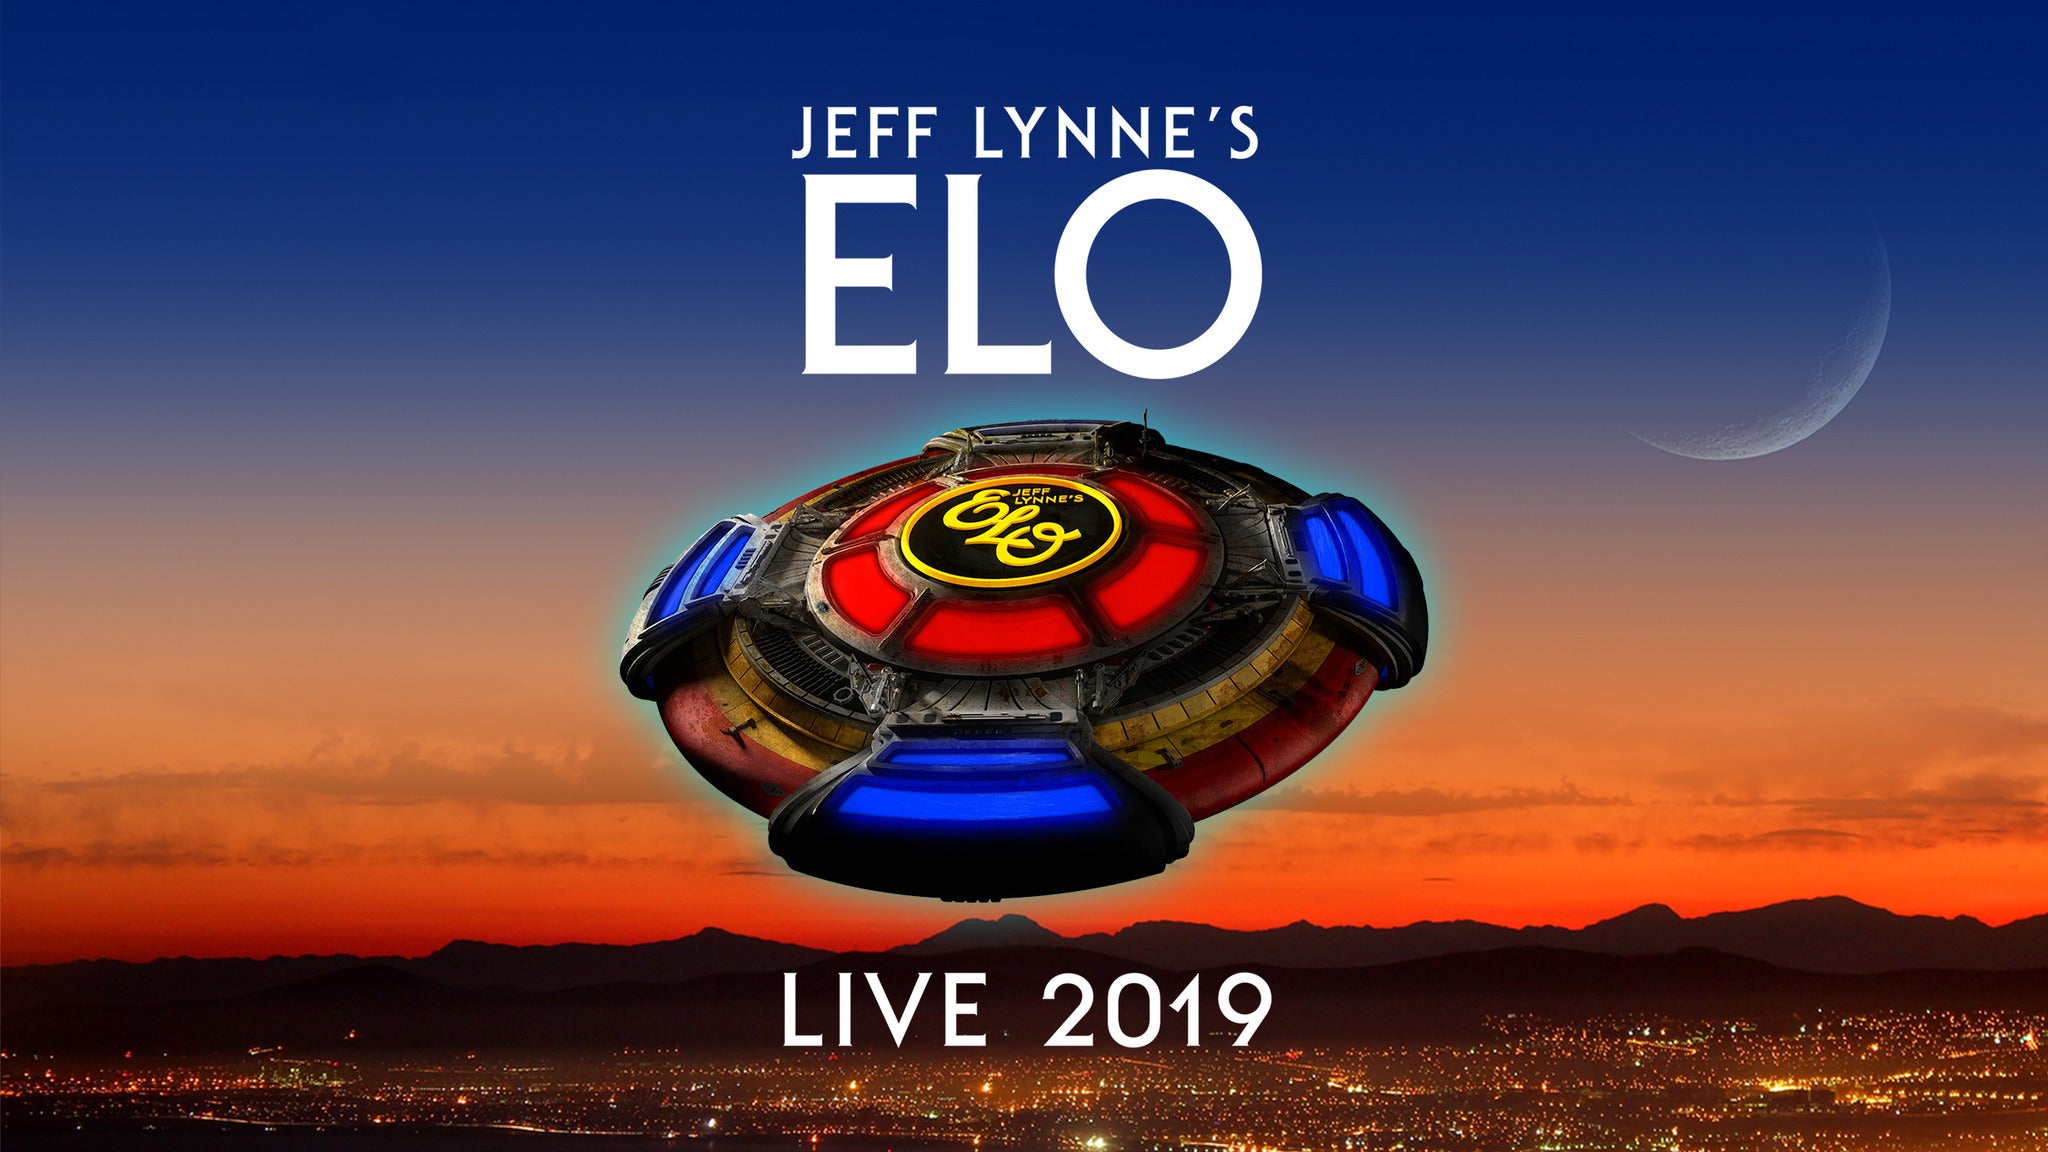 Jeff Lynne's ELO with special guest Dhani Harrison in Anaheim promo photo for Ticketmaster presale offer code